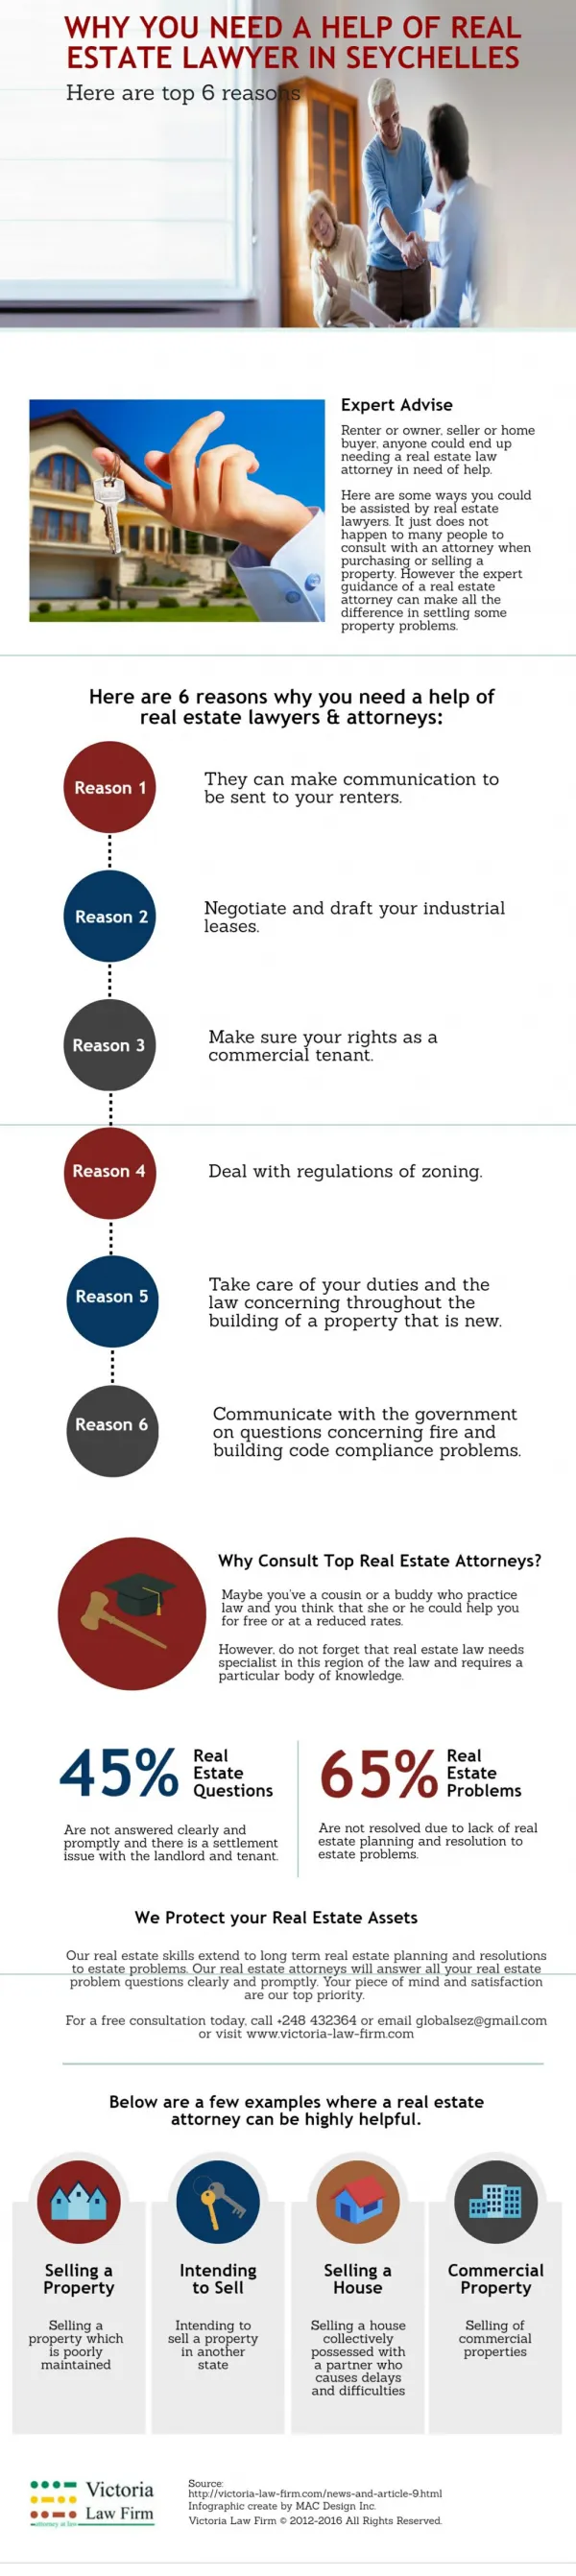 Why You Need a Help Of Real Estate Lawyer in Seychelles?